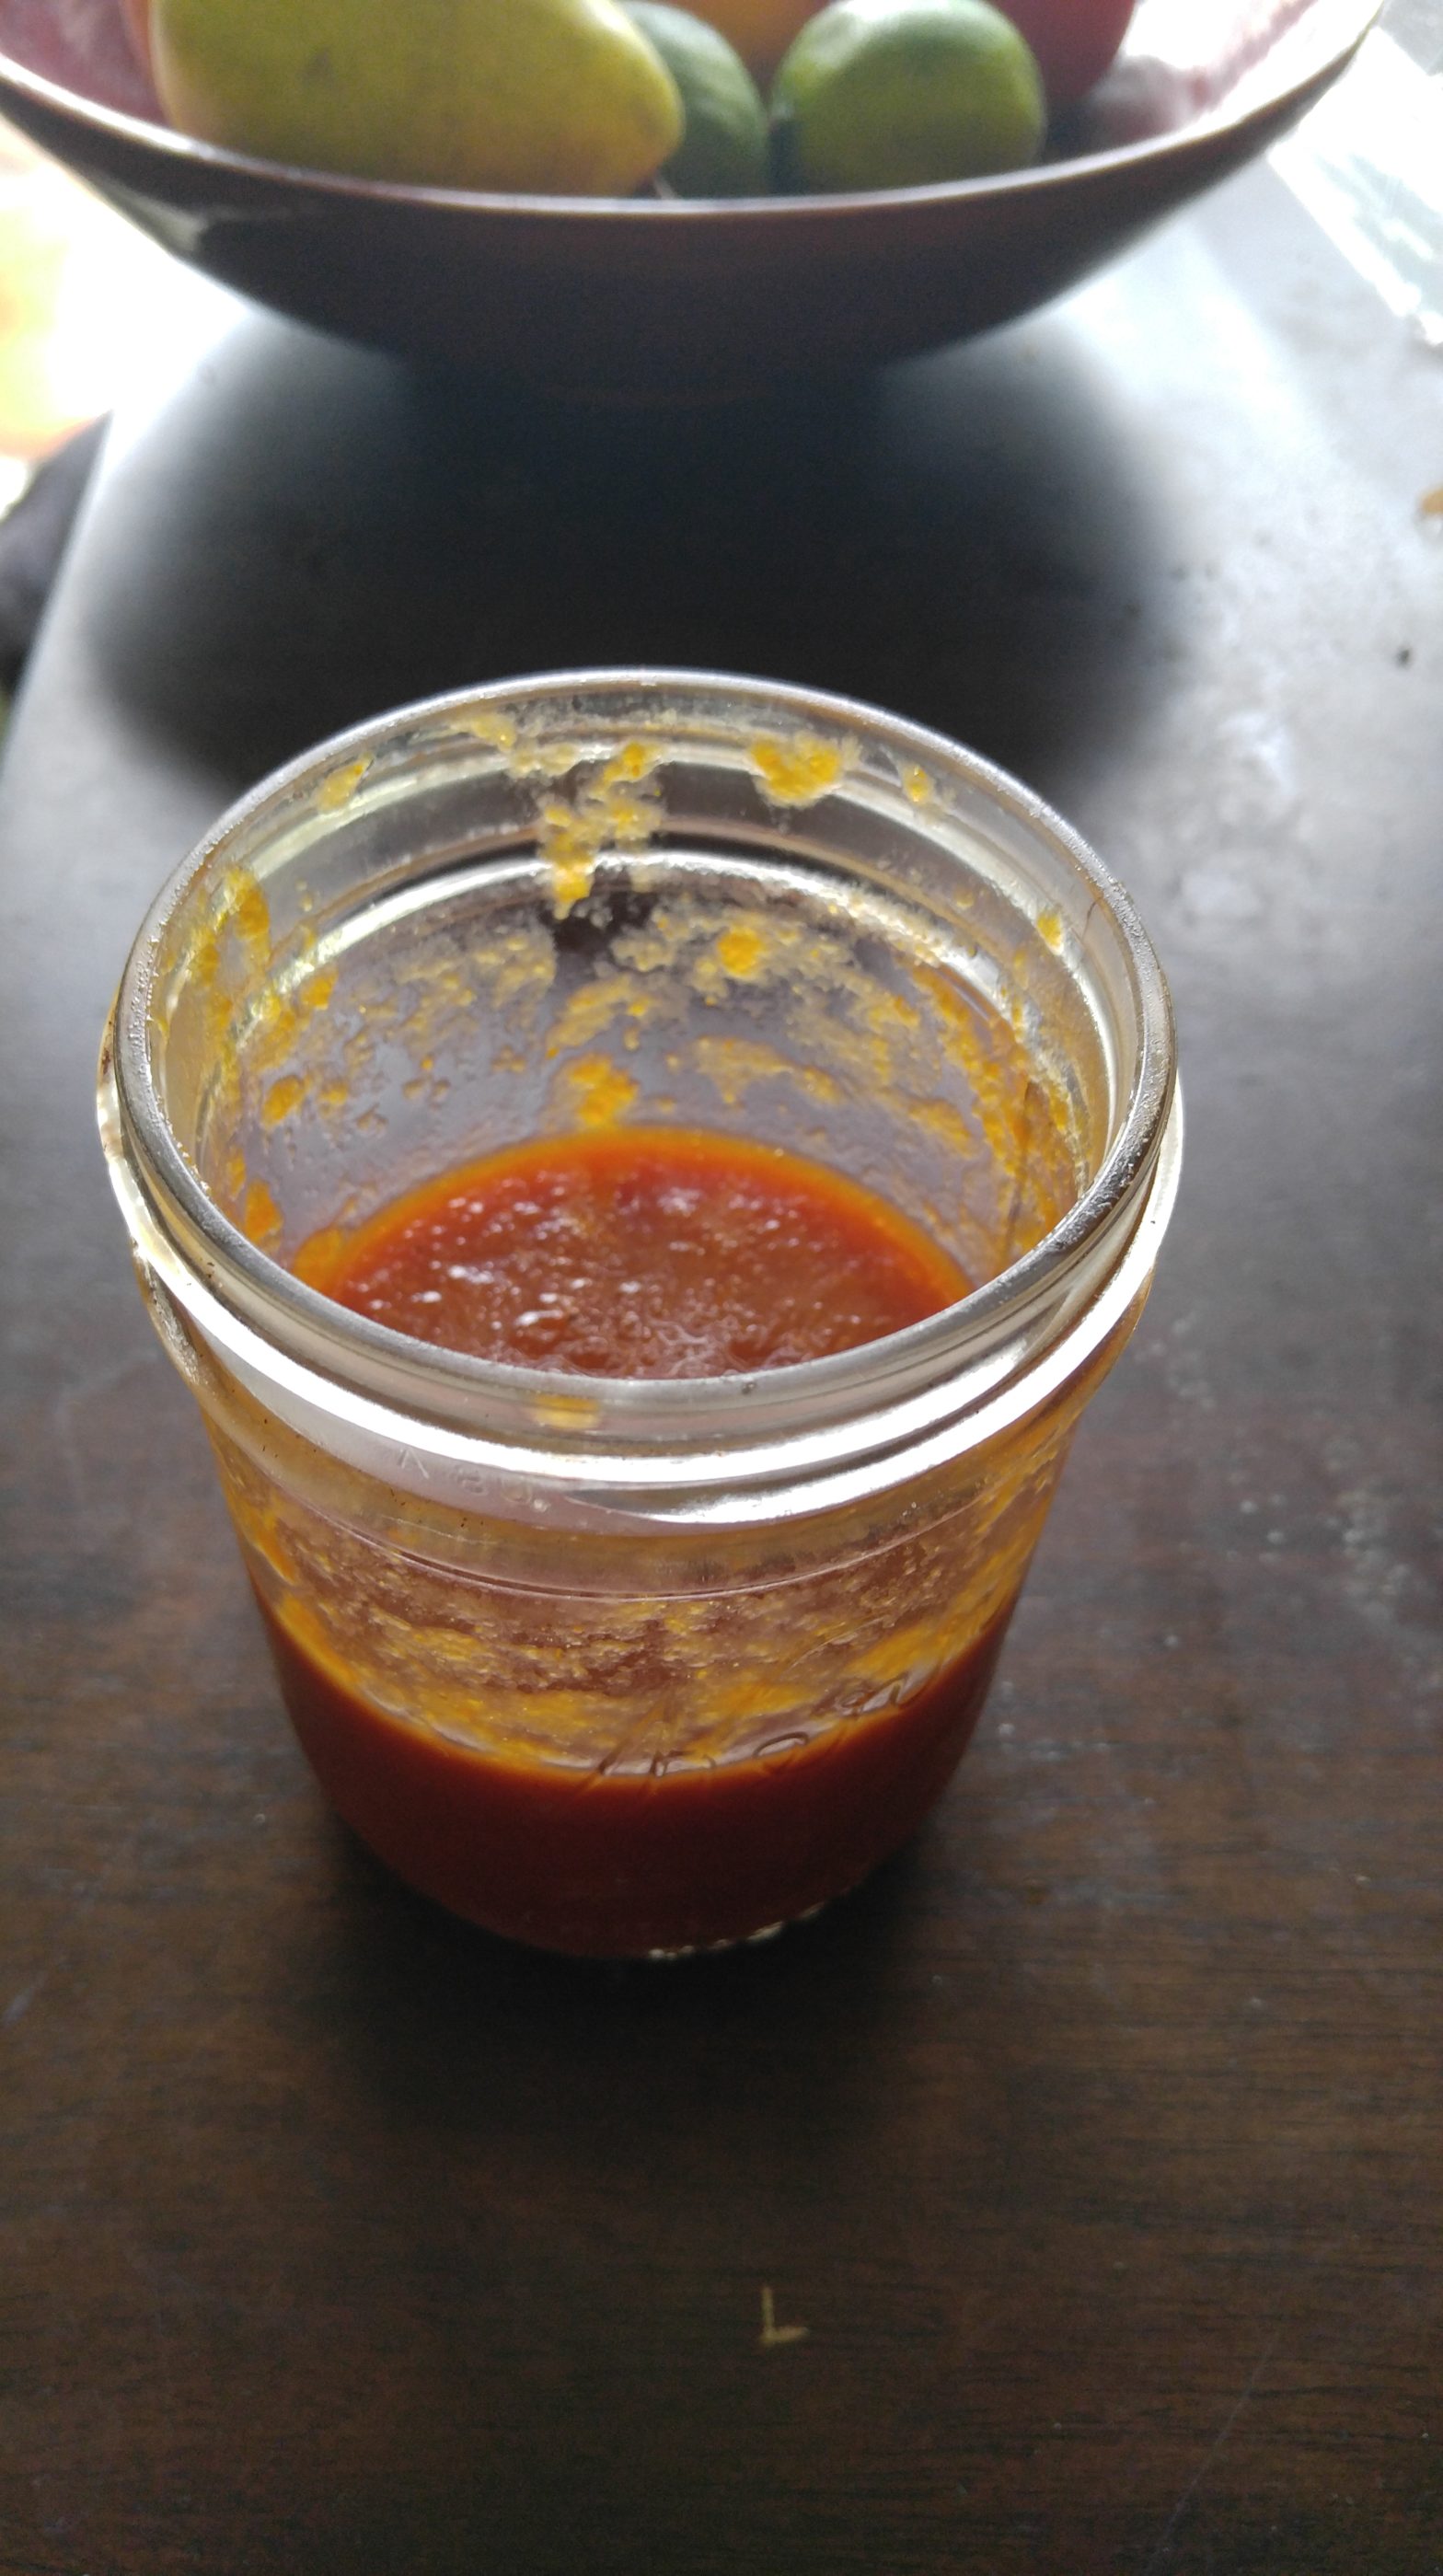 Primalized Peach Barbeque Sauce